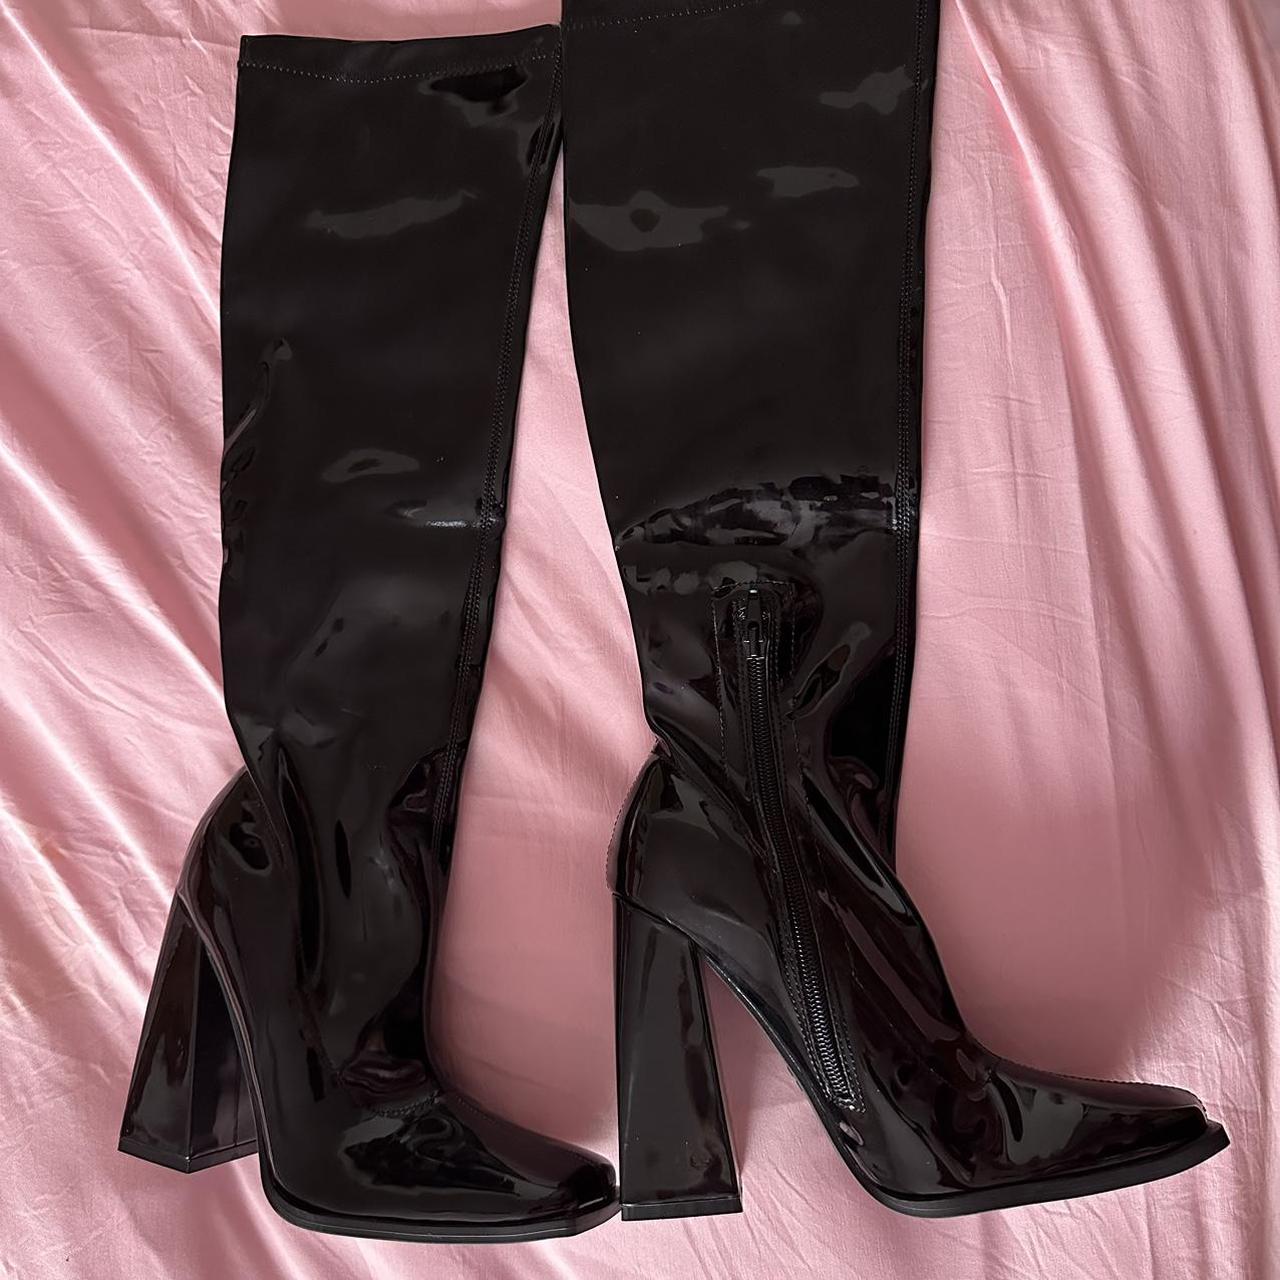 Patent Leather knee high boots Size 7 brand new... - Depop